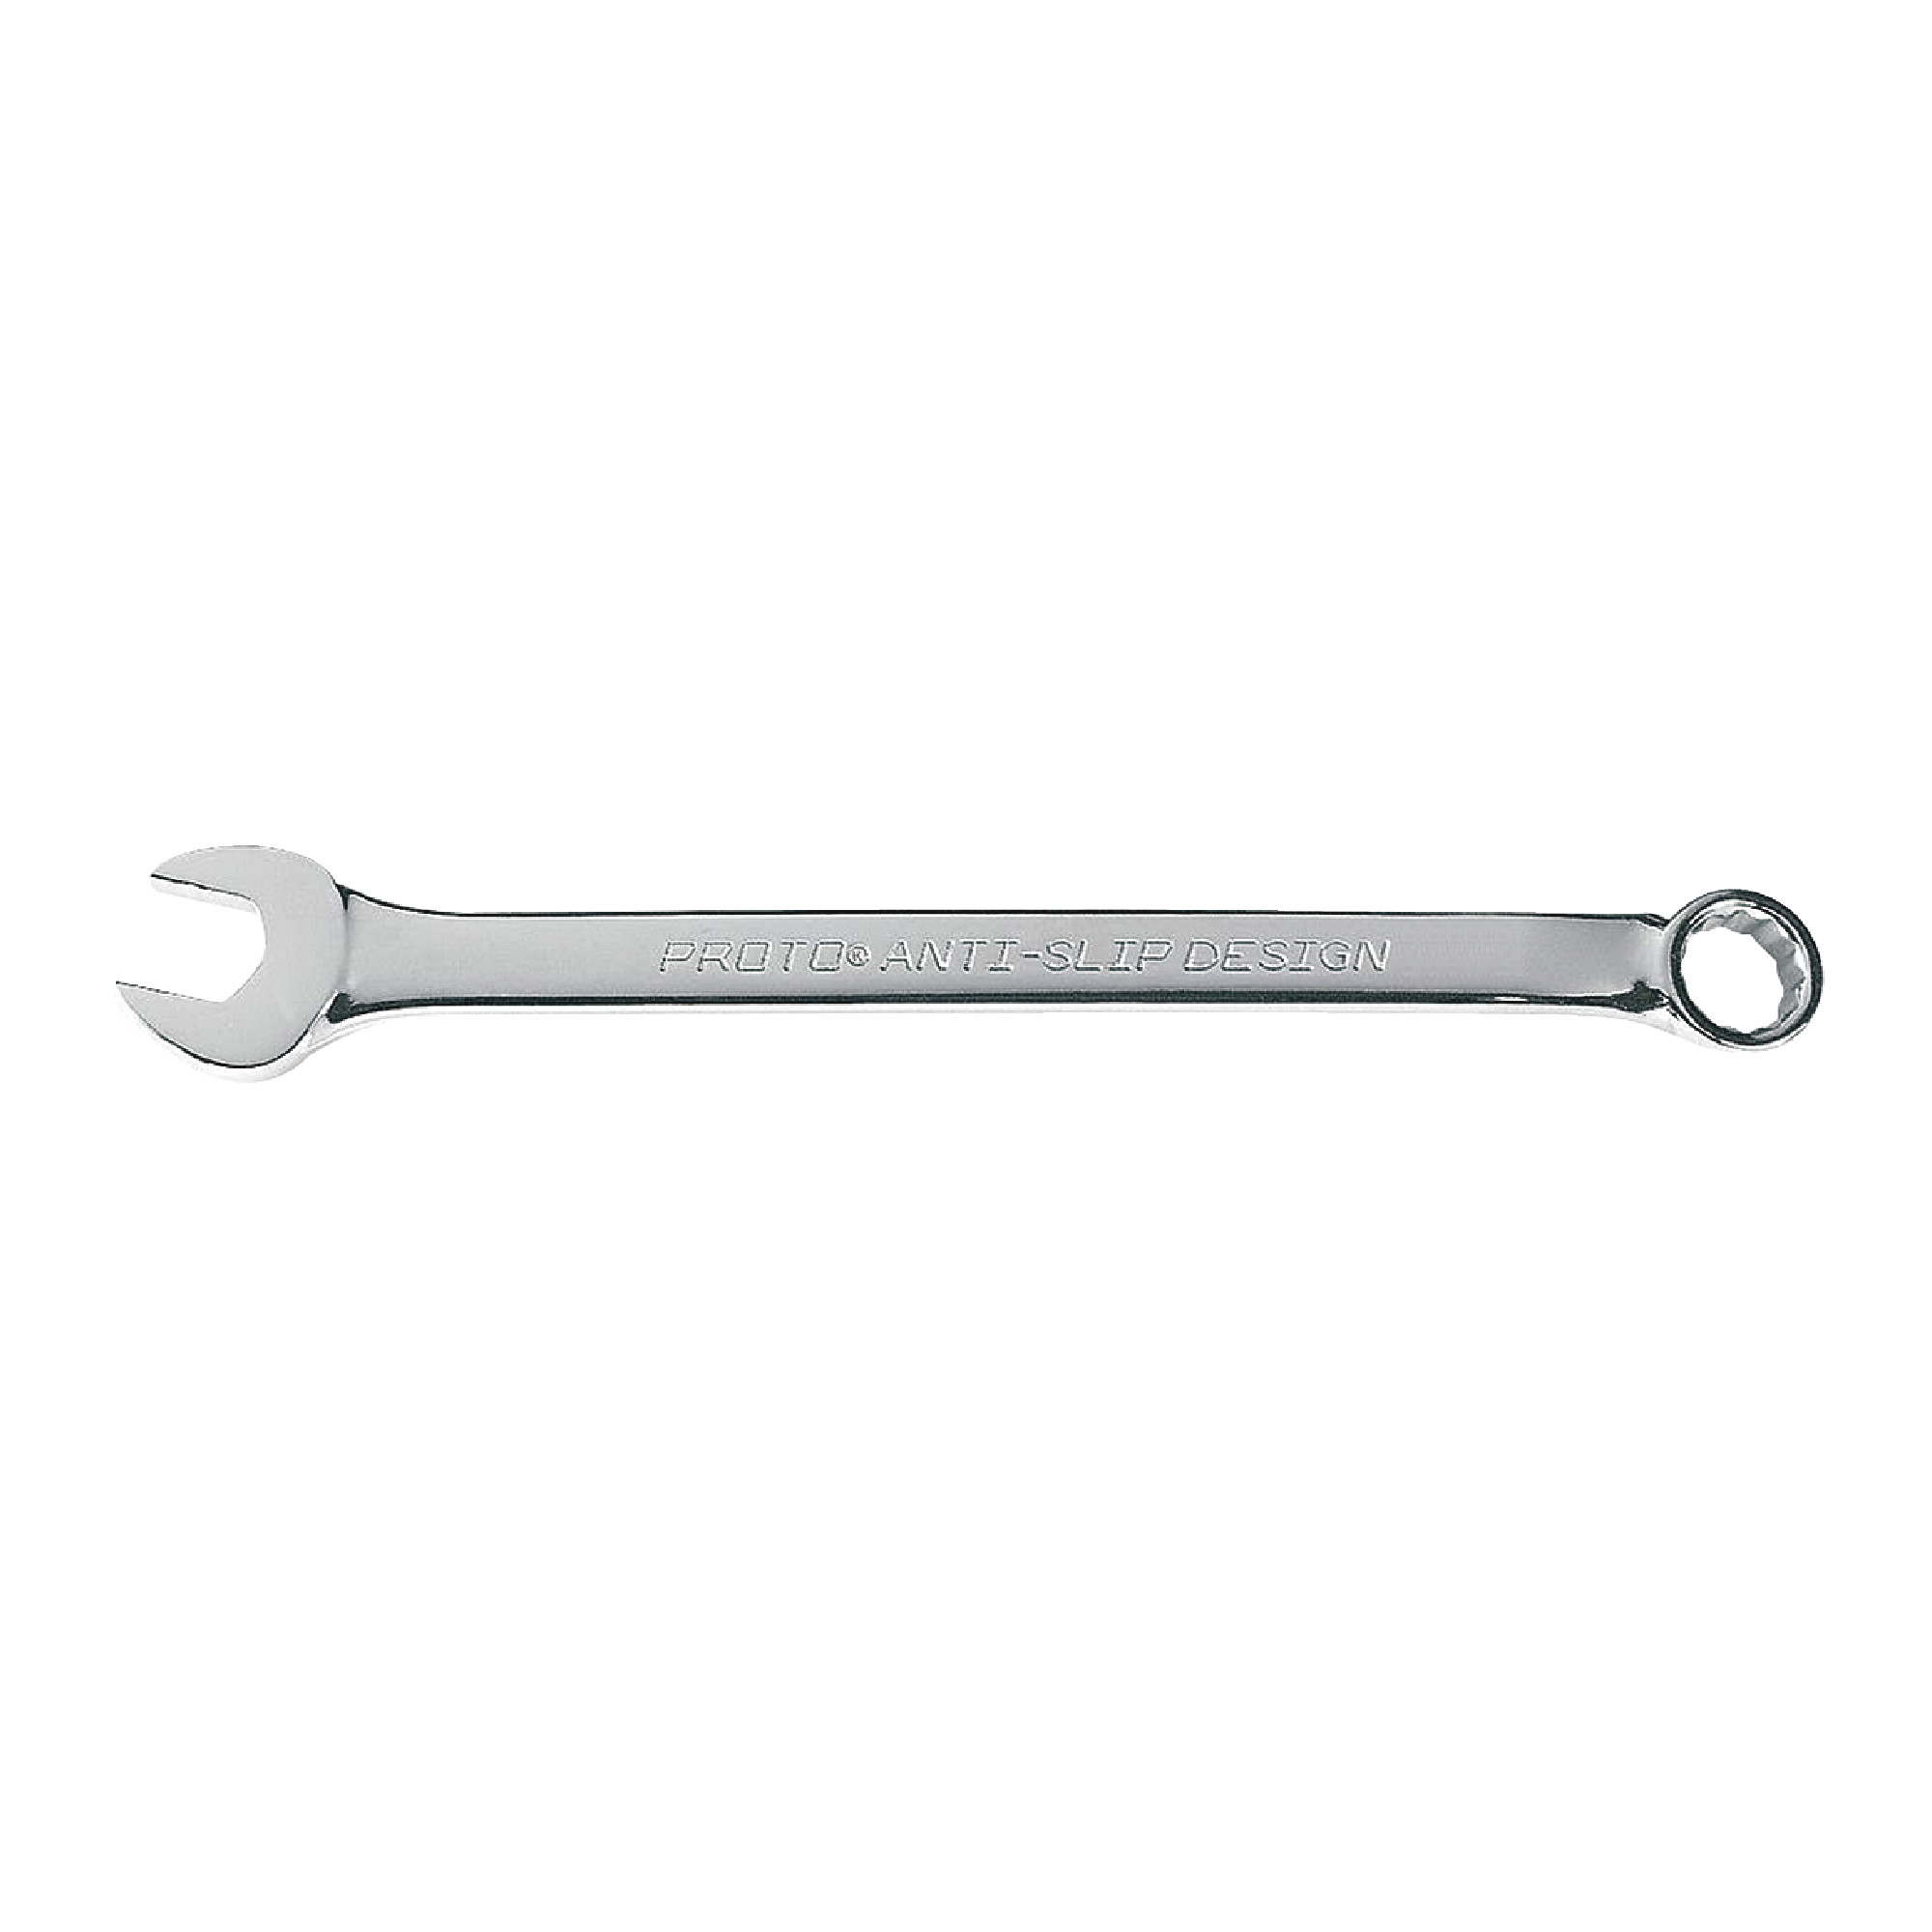 Satin Chrome Finish 11mm Combination Wrench